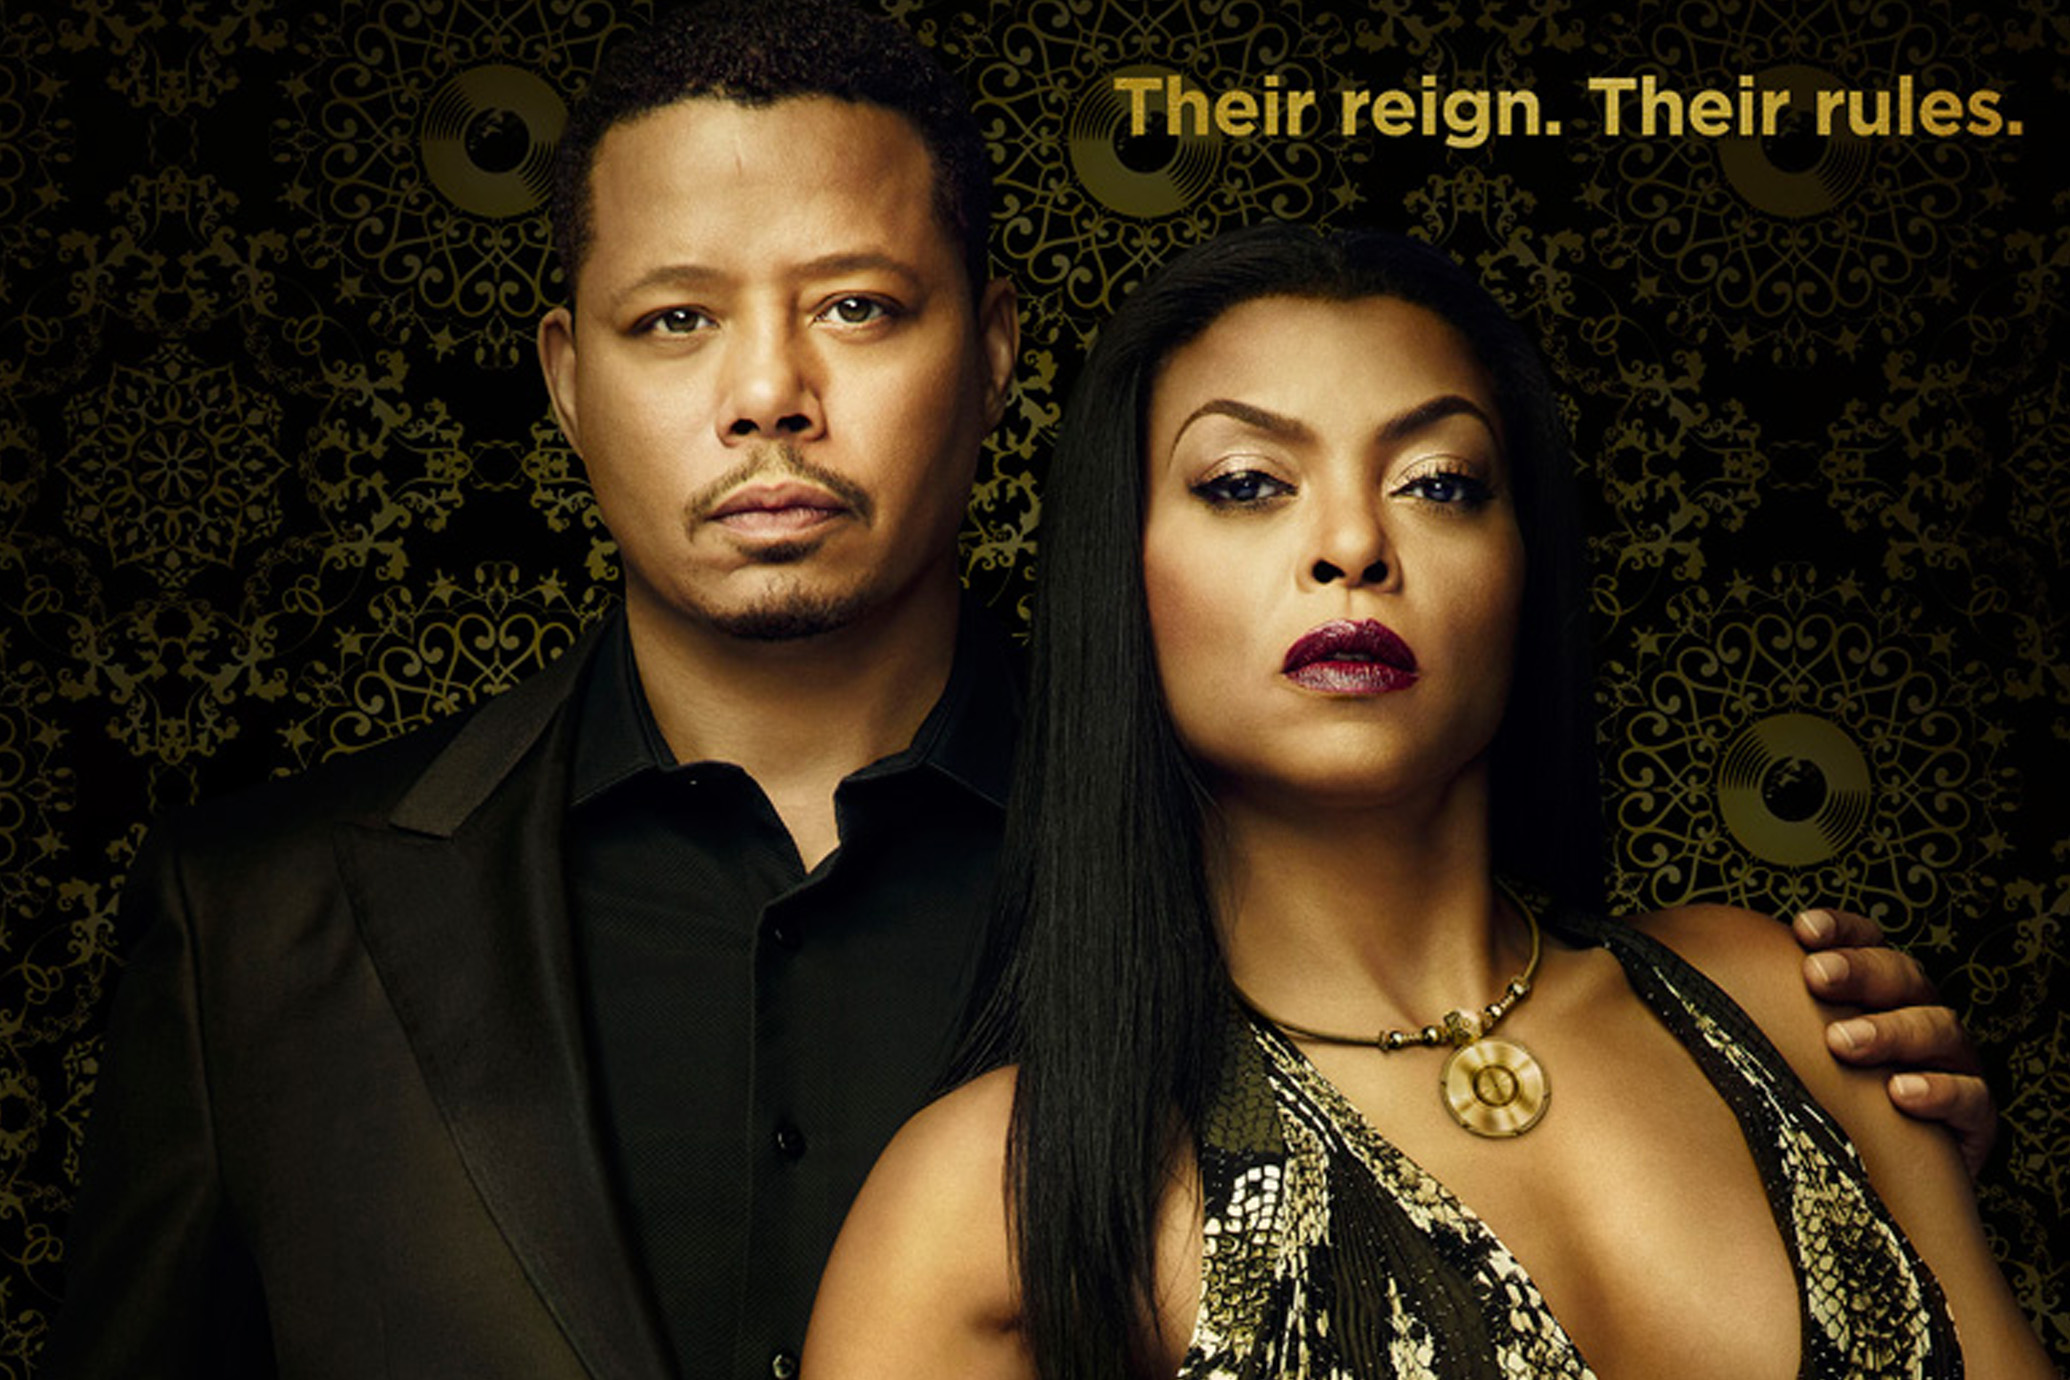 Empire: Lucious and Cookie Have Reconciled, According to This Season 3 Post...